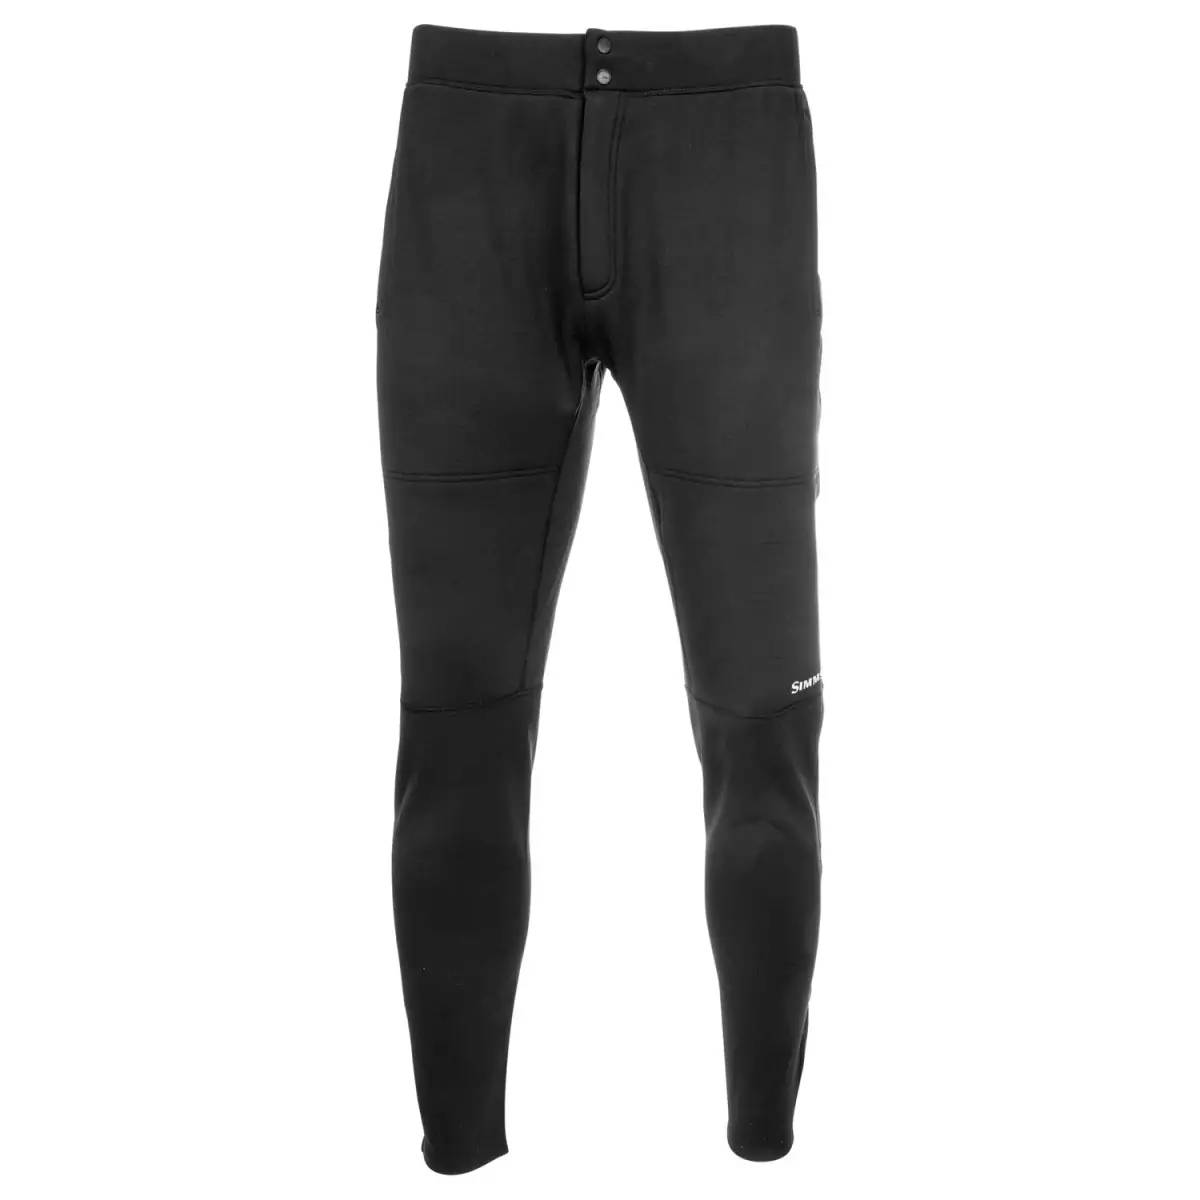 Штани Simms Thermal Pant Black XL (2191065 / 13315-001-50)